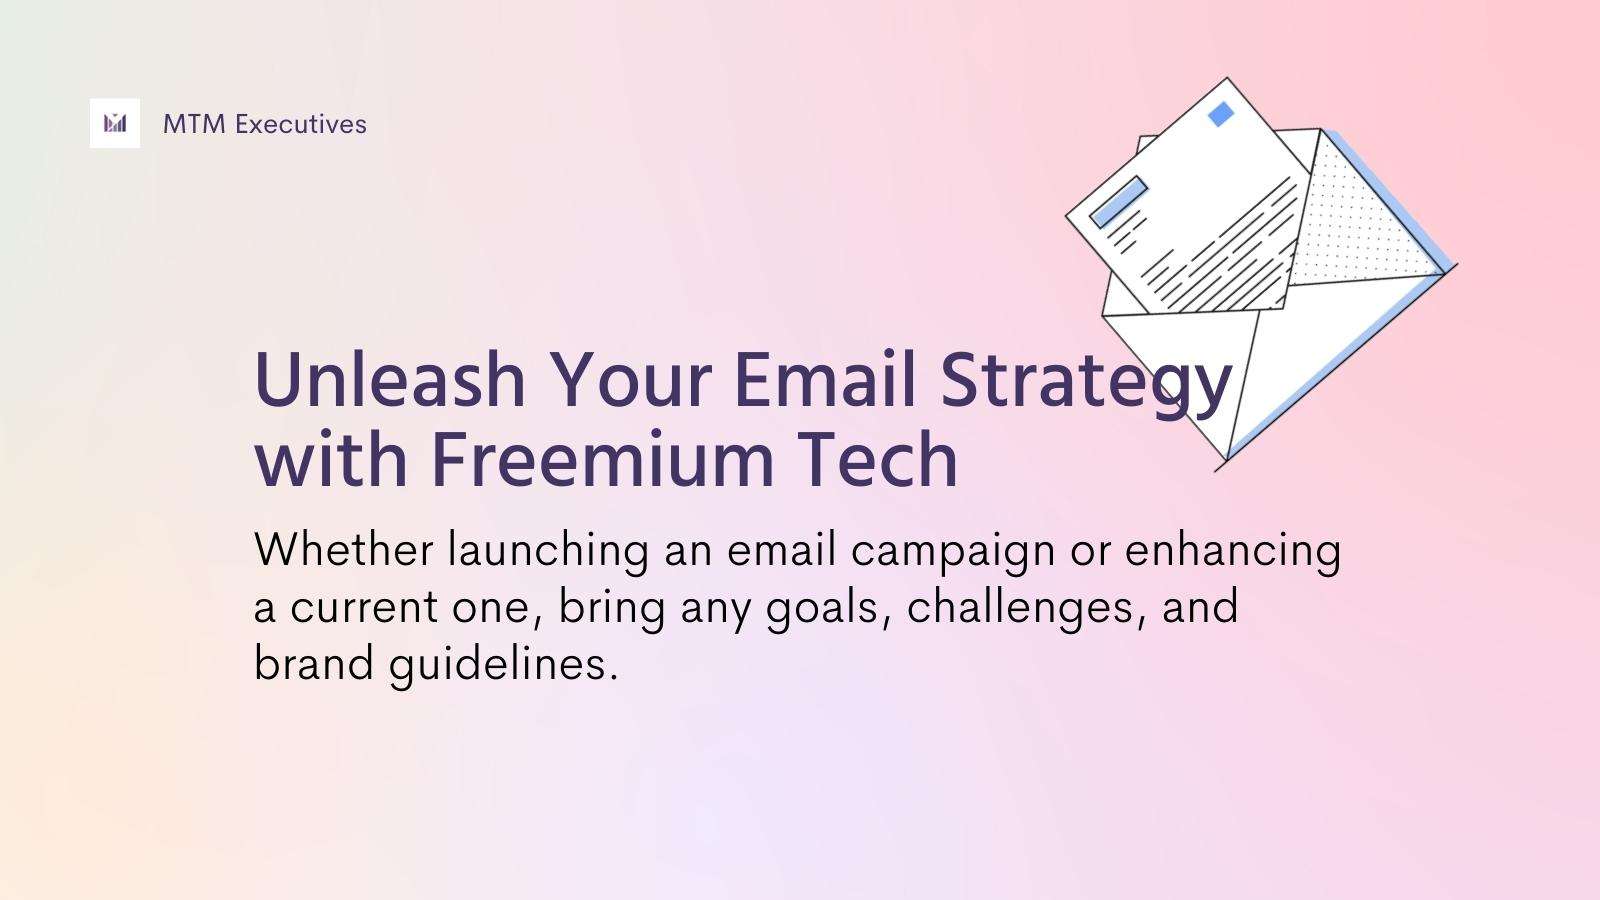 Email course: Whether launching an email campaign or enhancing a current one, bring any goals, challenges, and brand guidelines.